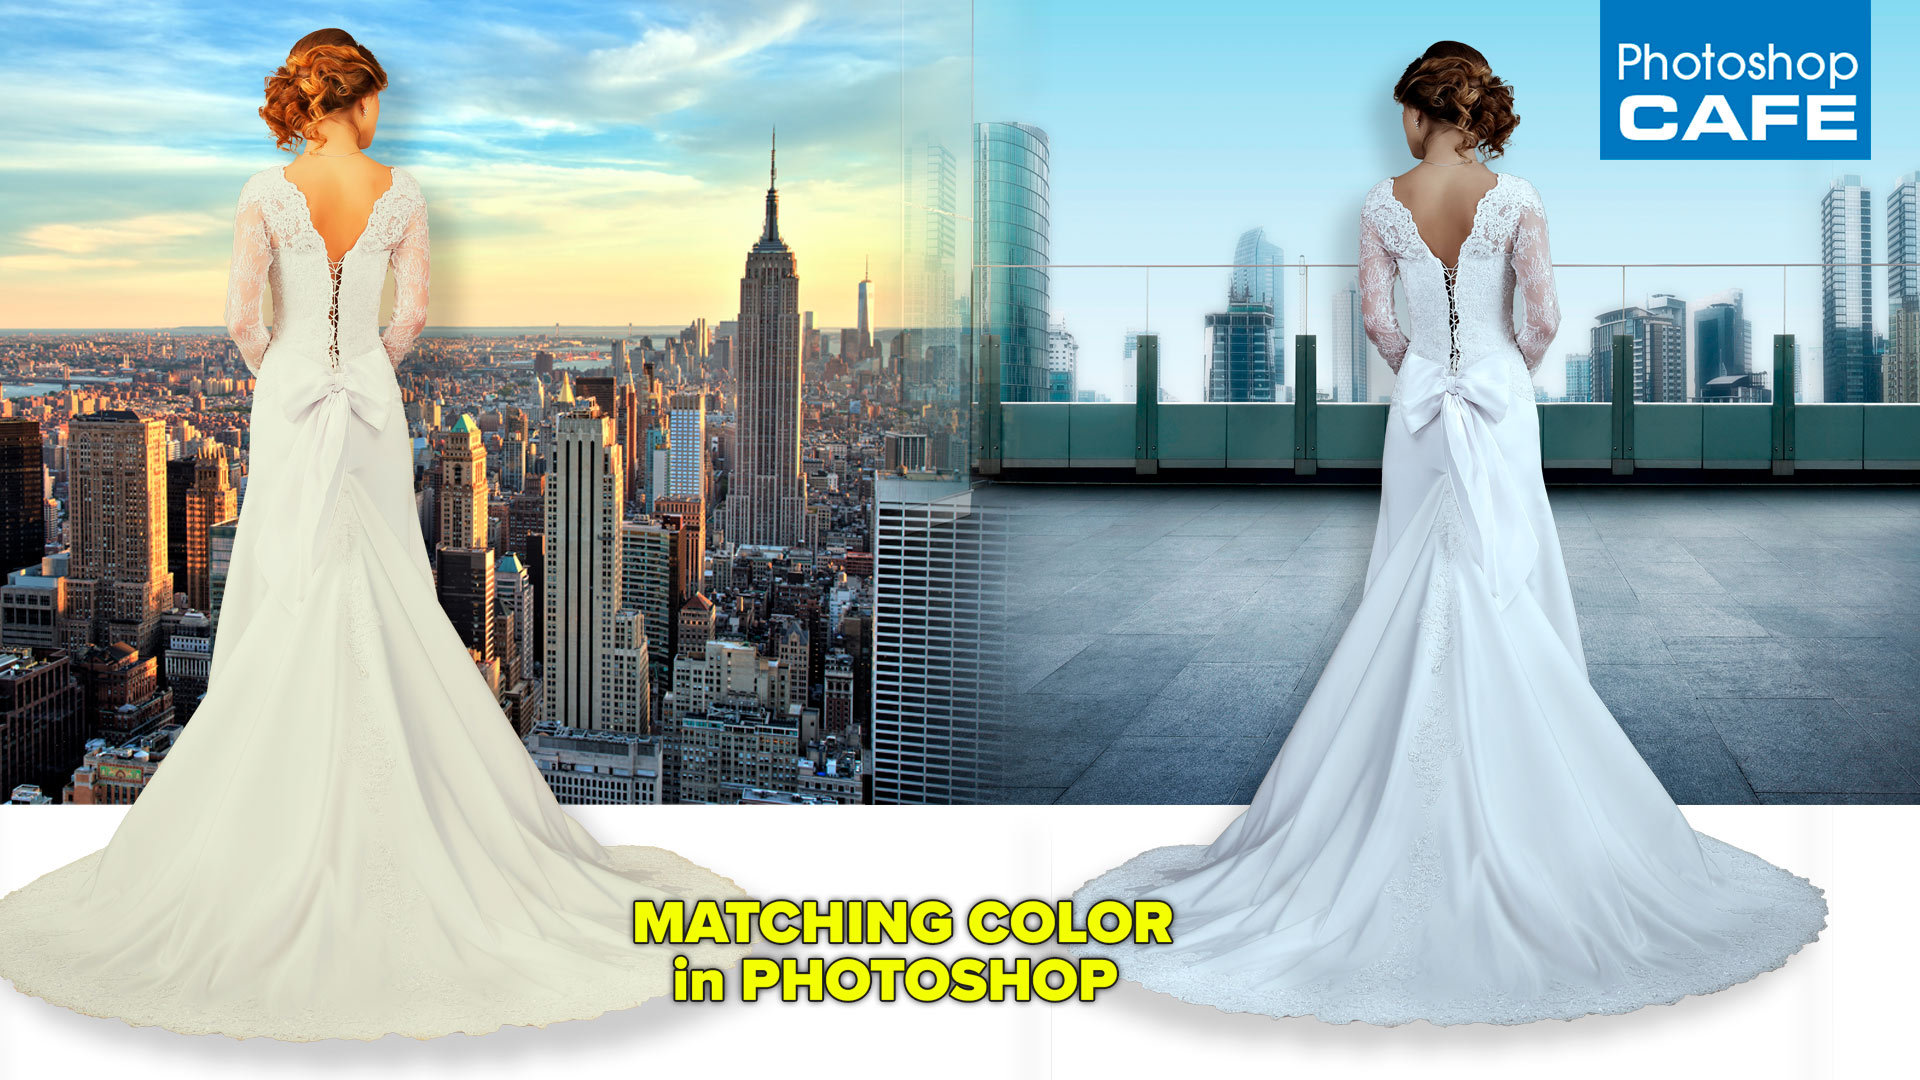 How To Make The Colors Match Between Different Photos - Empire State Building , HD Wallpaper & Backgrounds